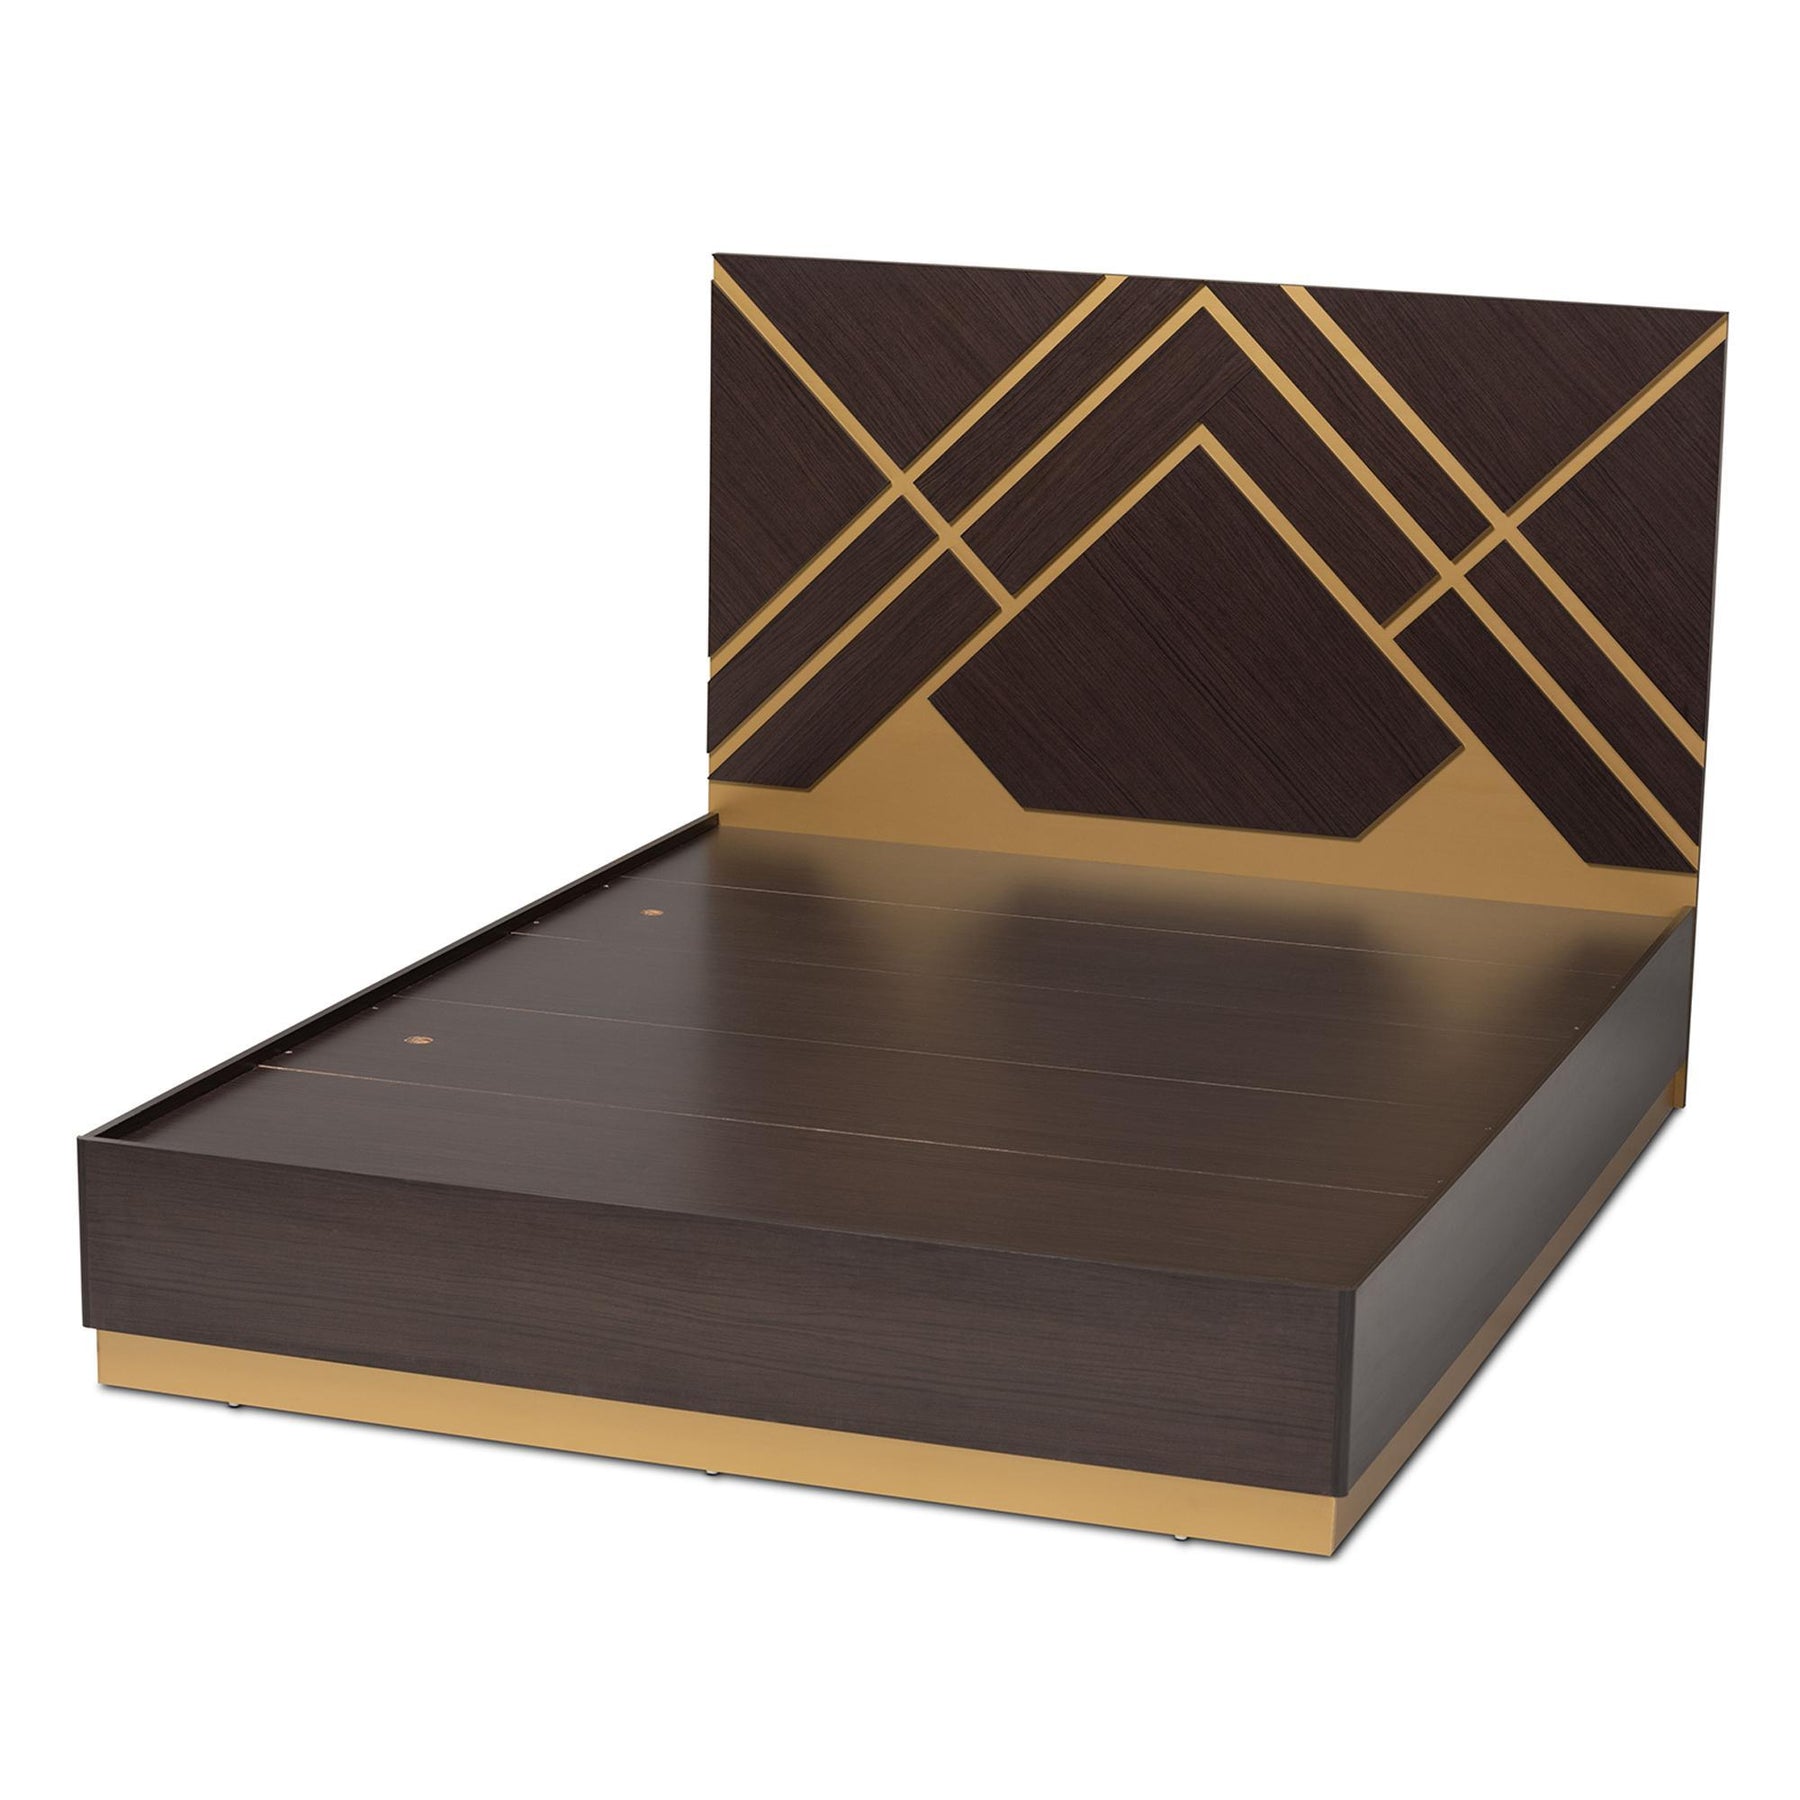 Baxton Studio Arcelia Contemporary Glam And Luxe Two-Tone Dark Brown And Gold Finished Wood Queen Size Platform Bed - SEBED13032026-Modi Wenge/Gold-Queen